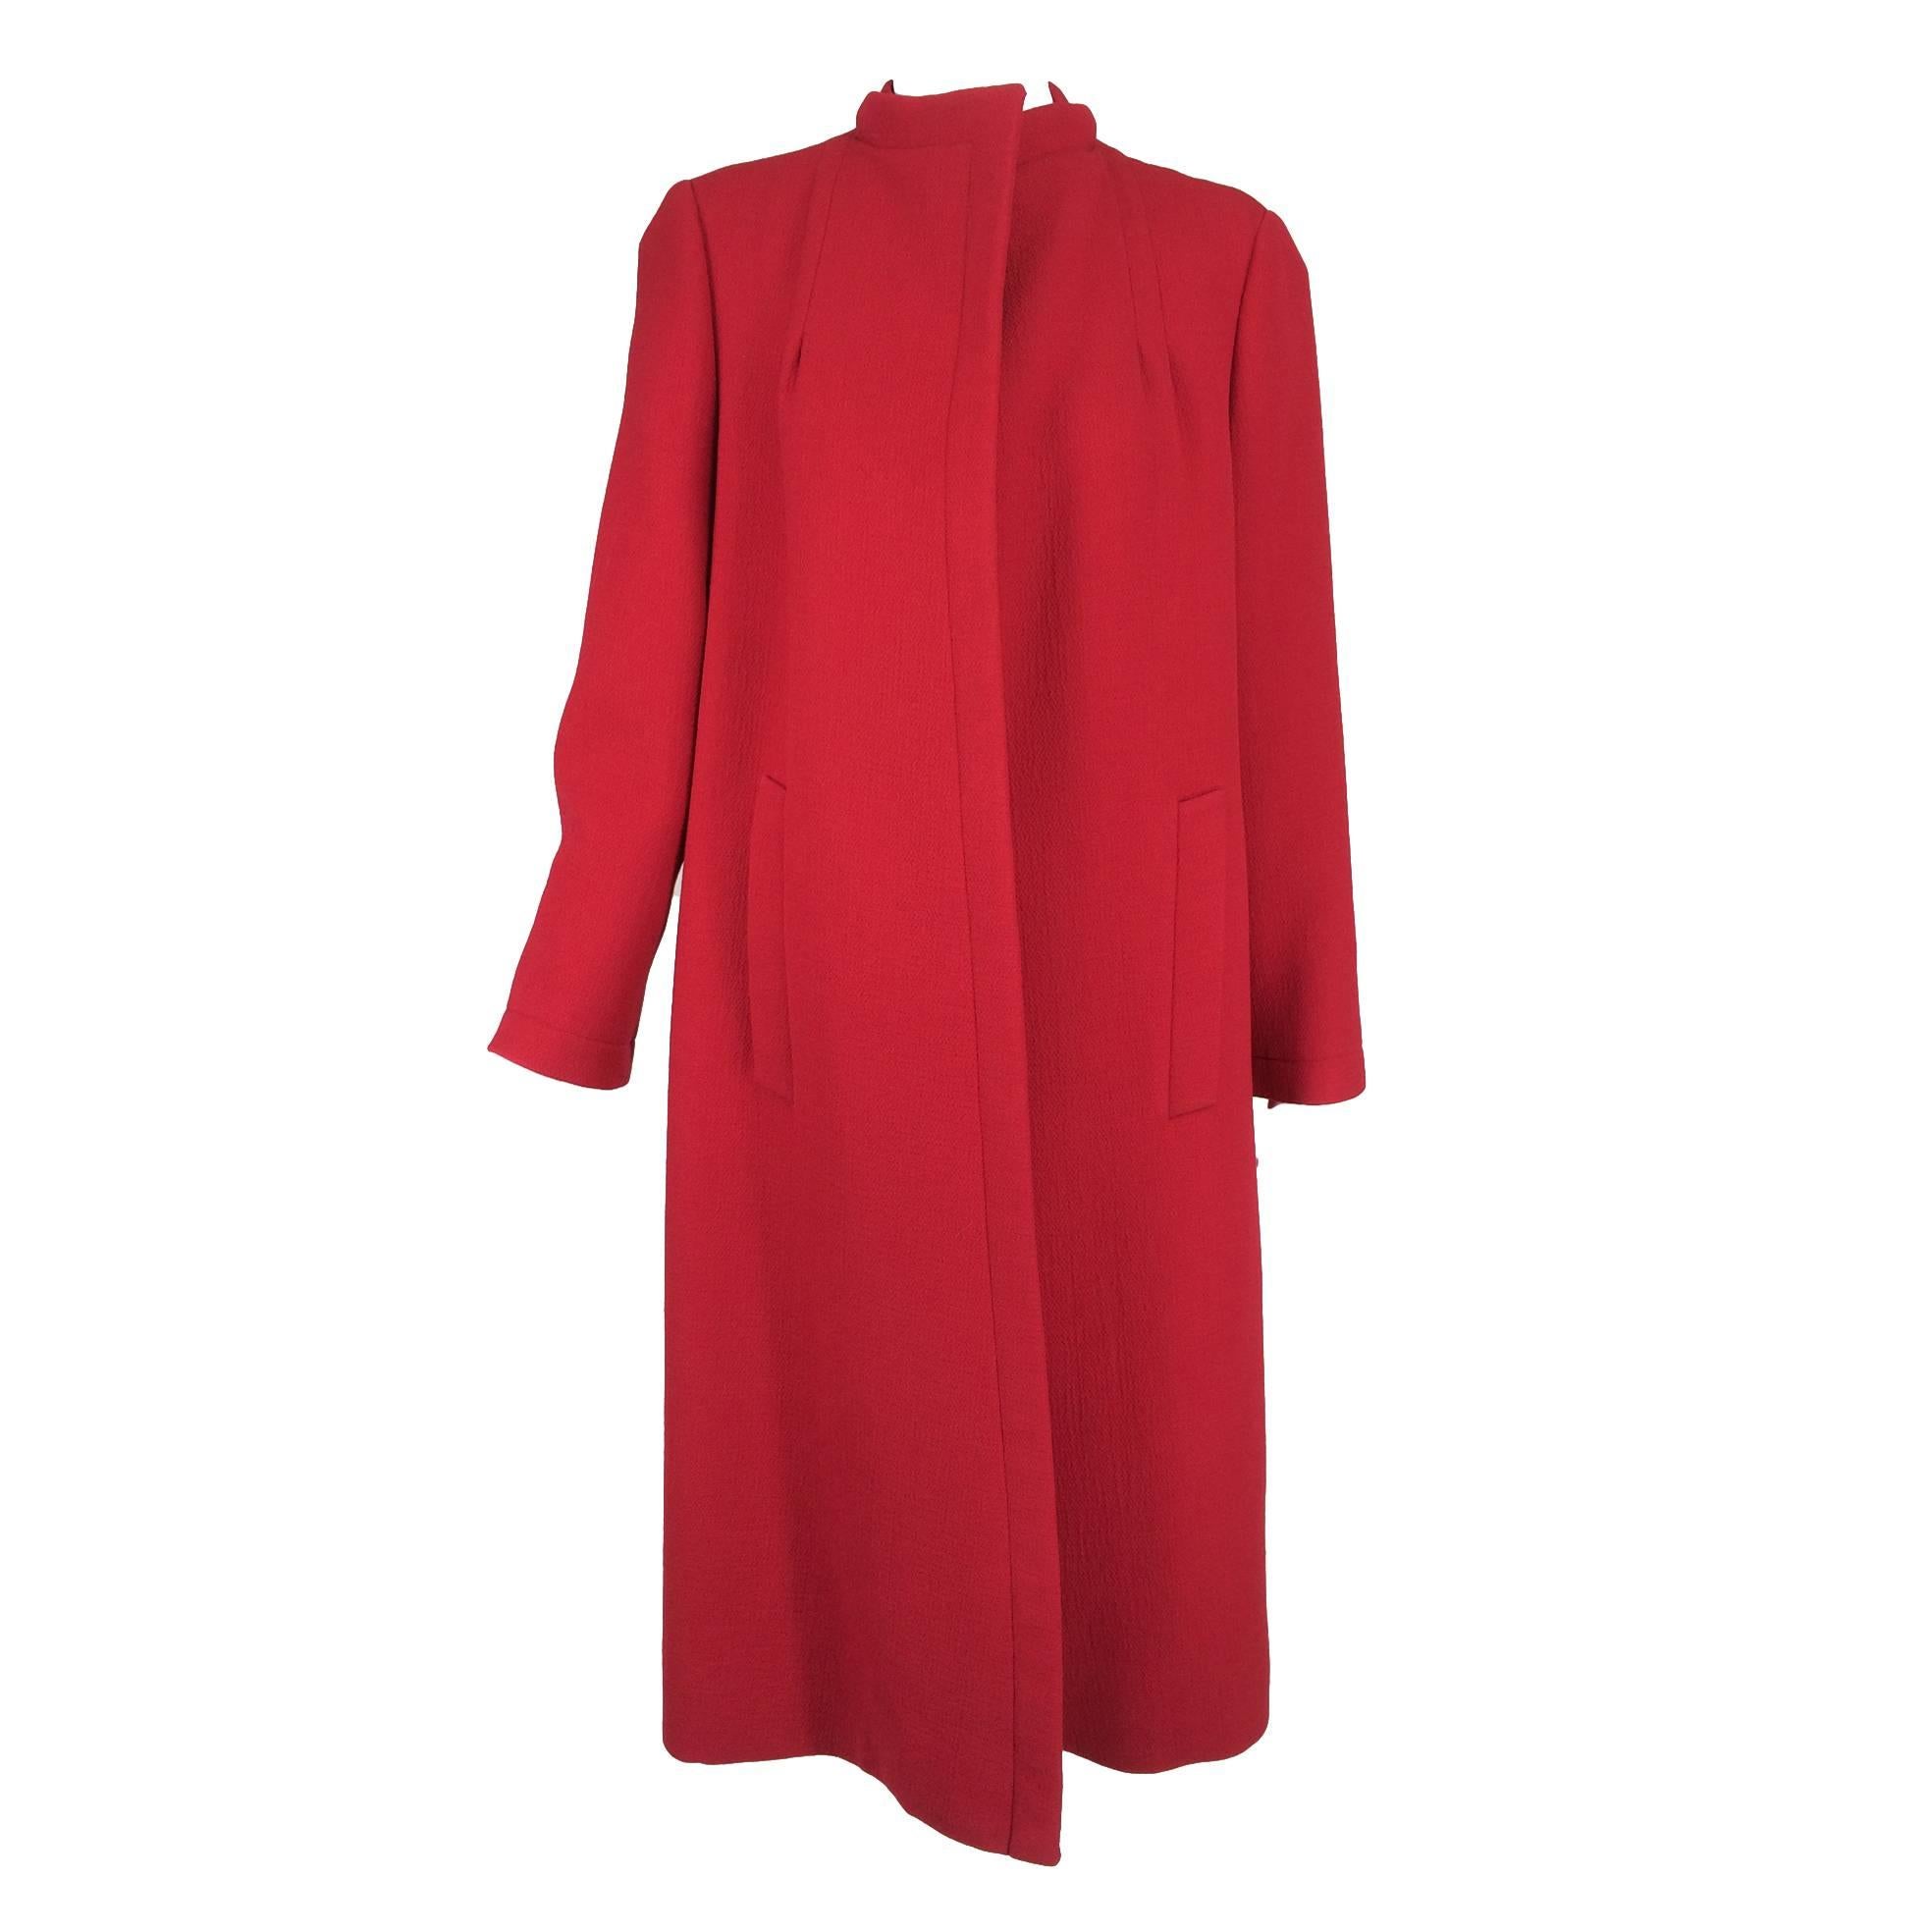 Pauline Trigere chic cherry red wool open front coat 1950s